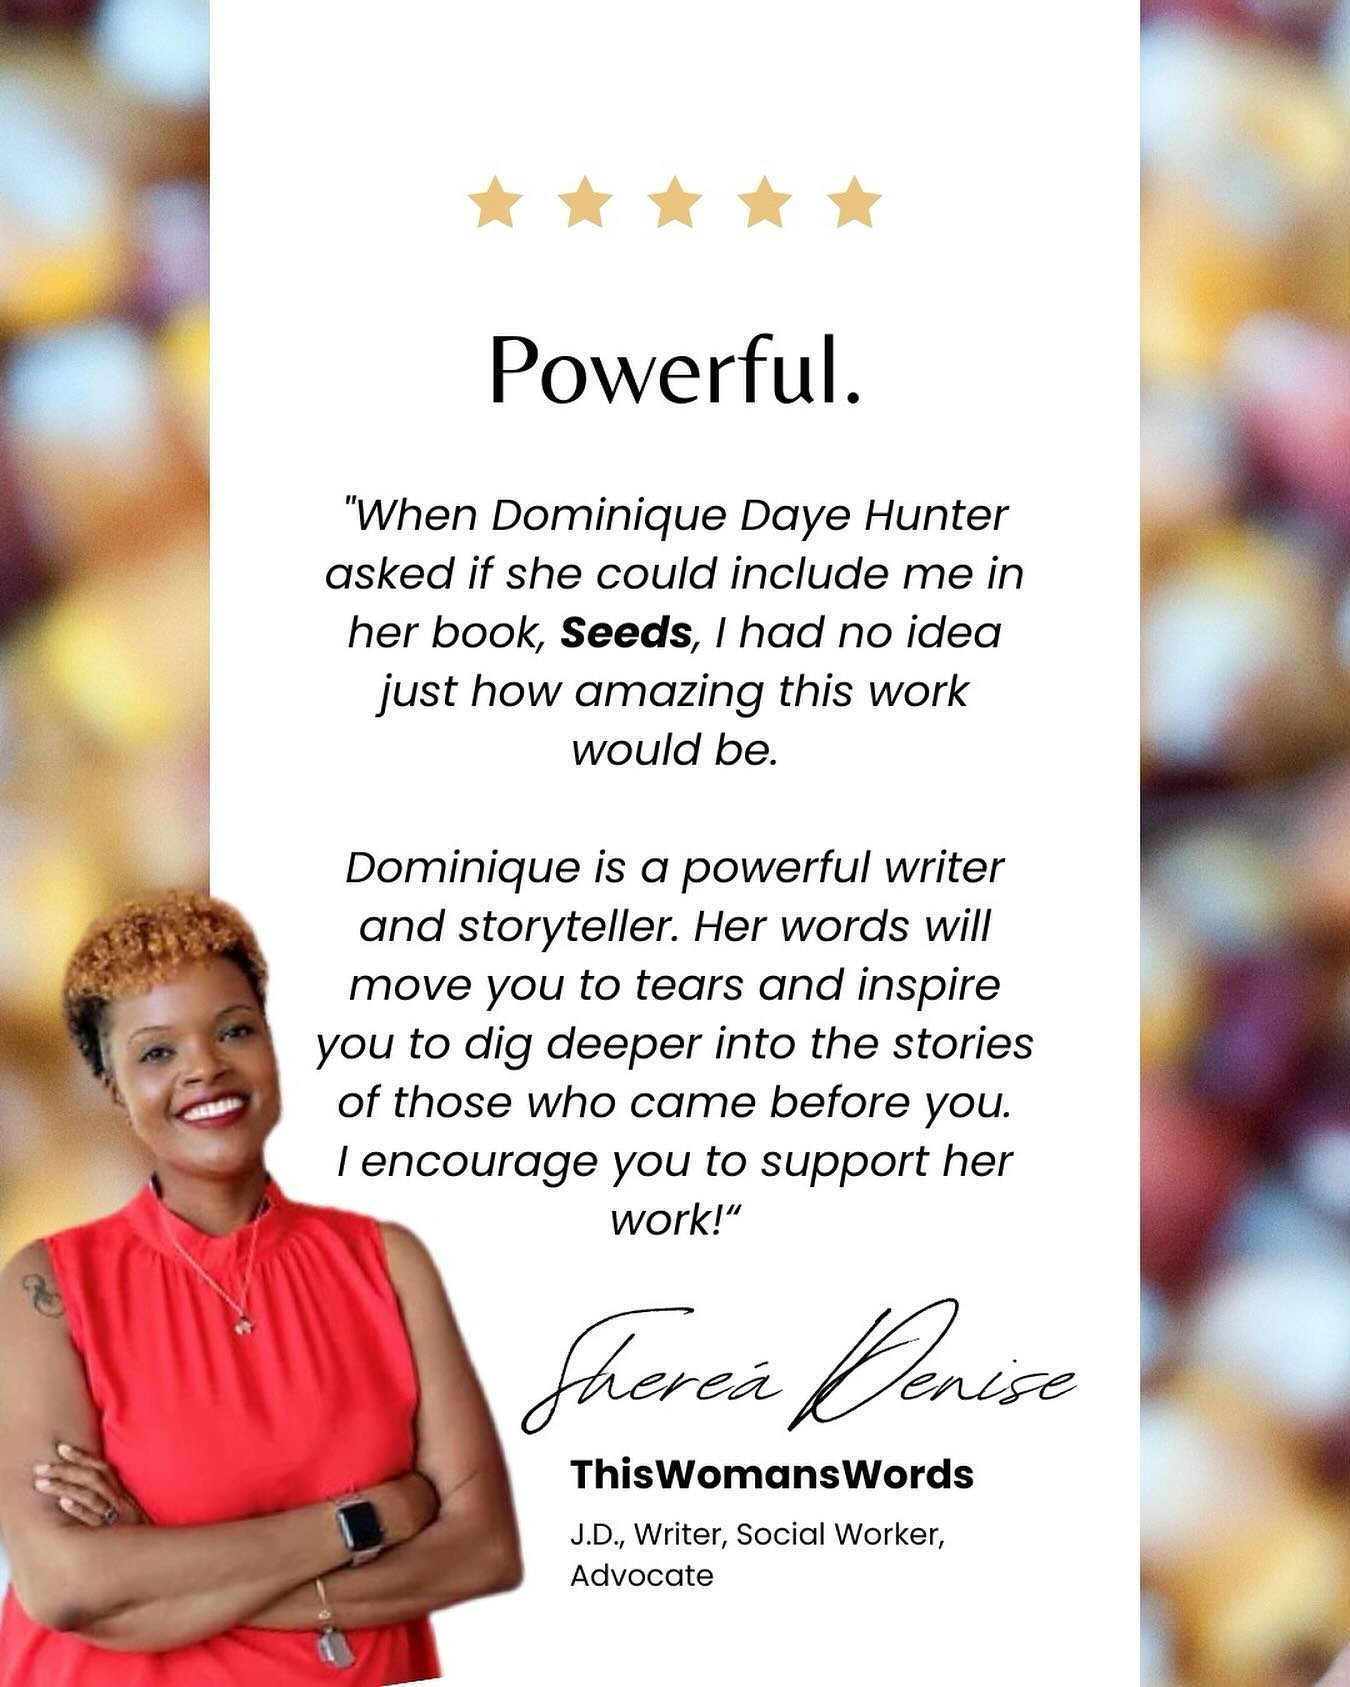 B&iacute;:se for your kind words of encouragement always, gida!! 😊📕

&ldquo;When Dominique Daye Hunter asked if she could include me in her book, Seeds, I had no idea just how amazing this work would be.

Dominique is a powerful writer and storytel